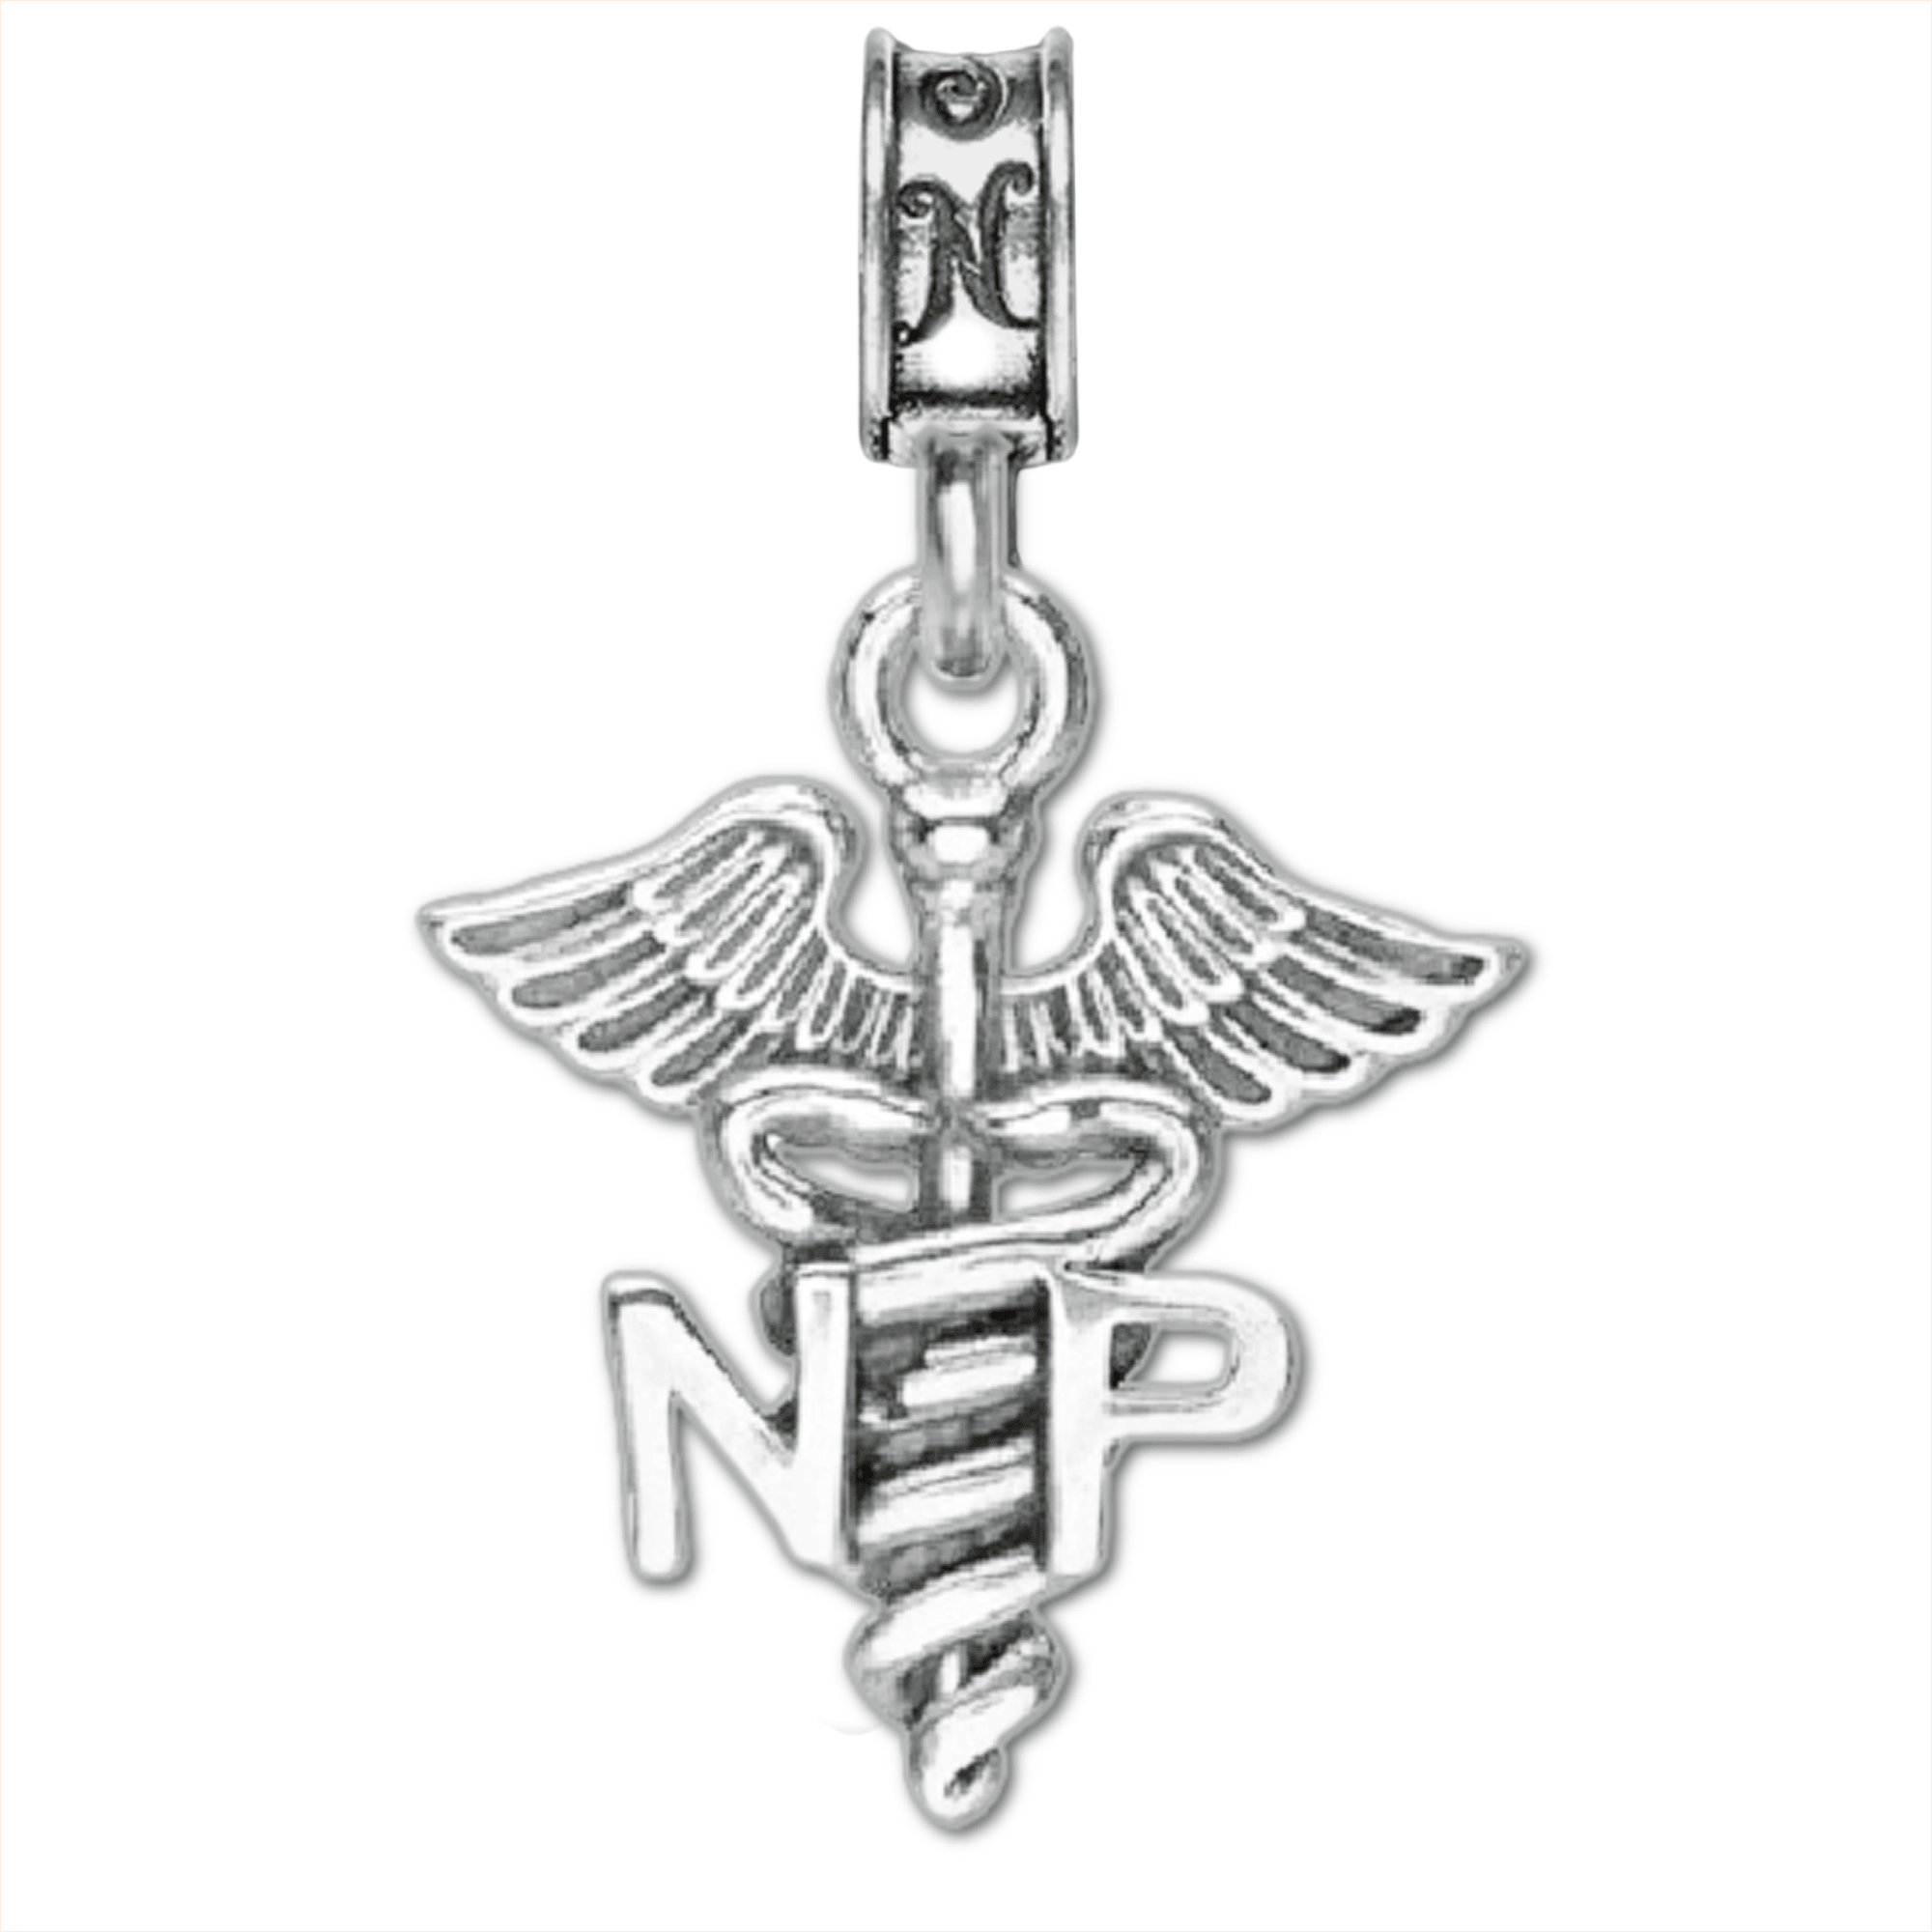 Military Jewelry, Military Charms, Military Gifts,  Nurse Practitioner Charm, NP Charm